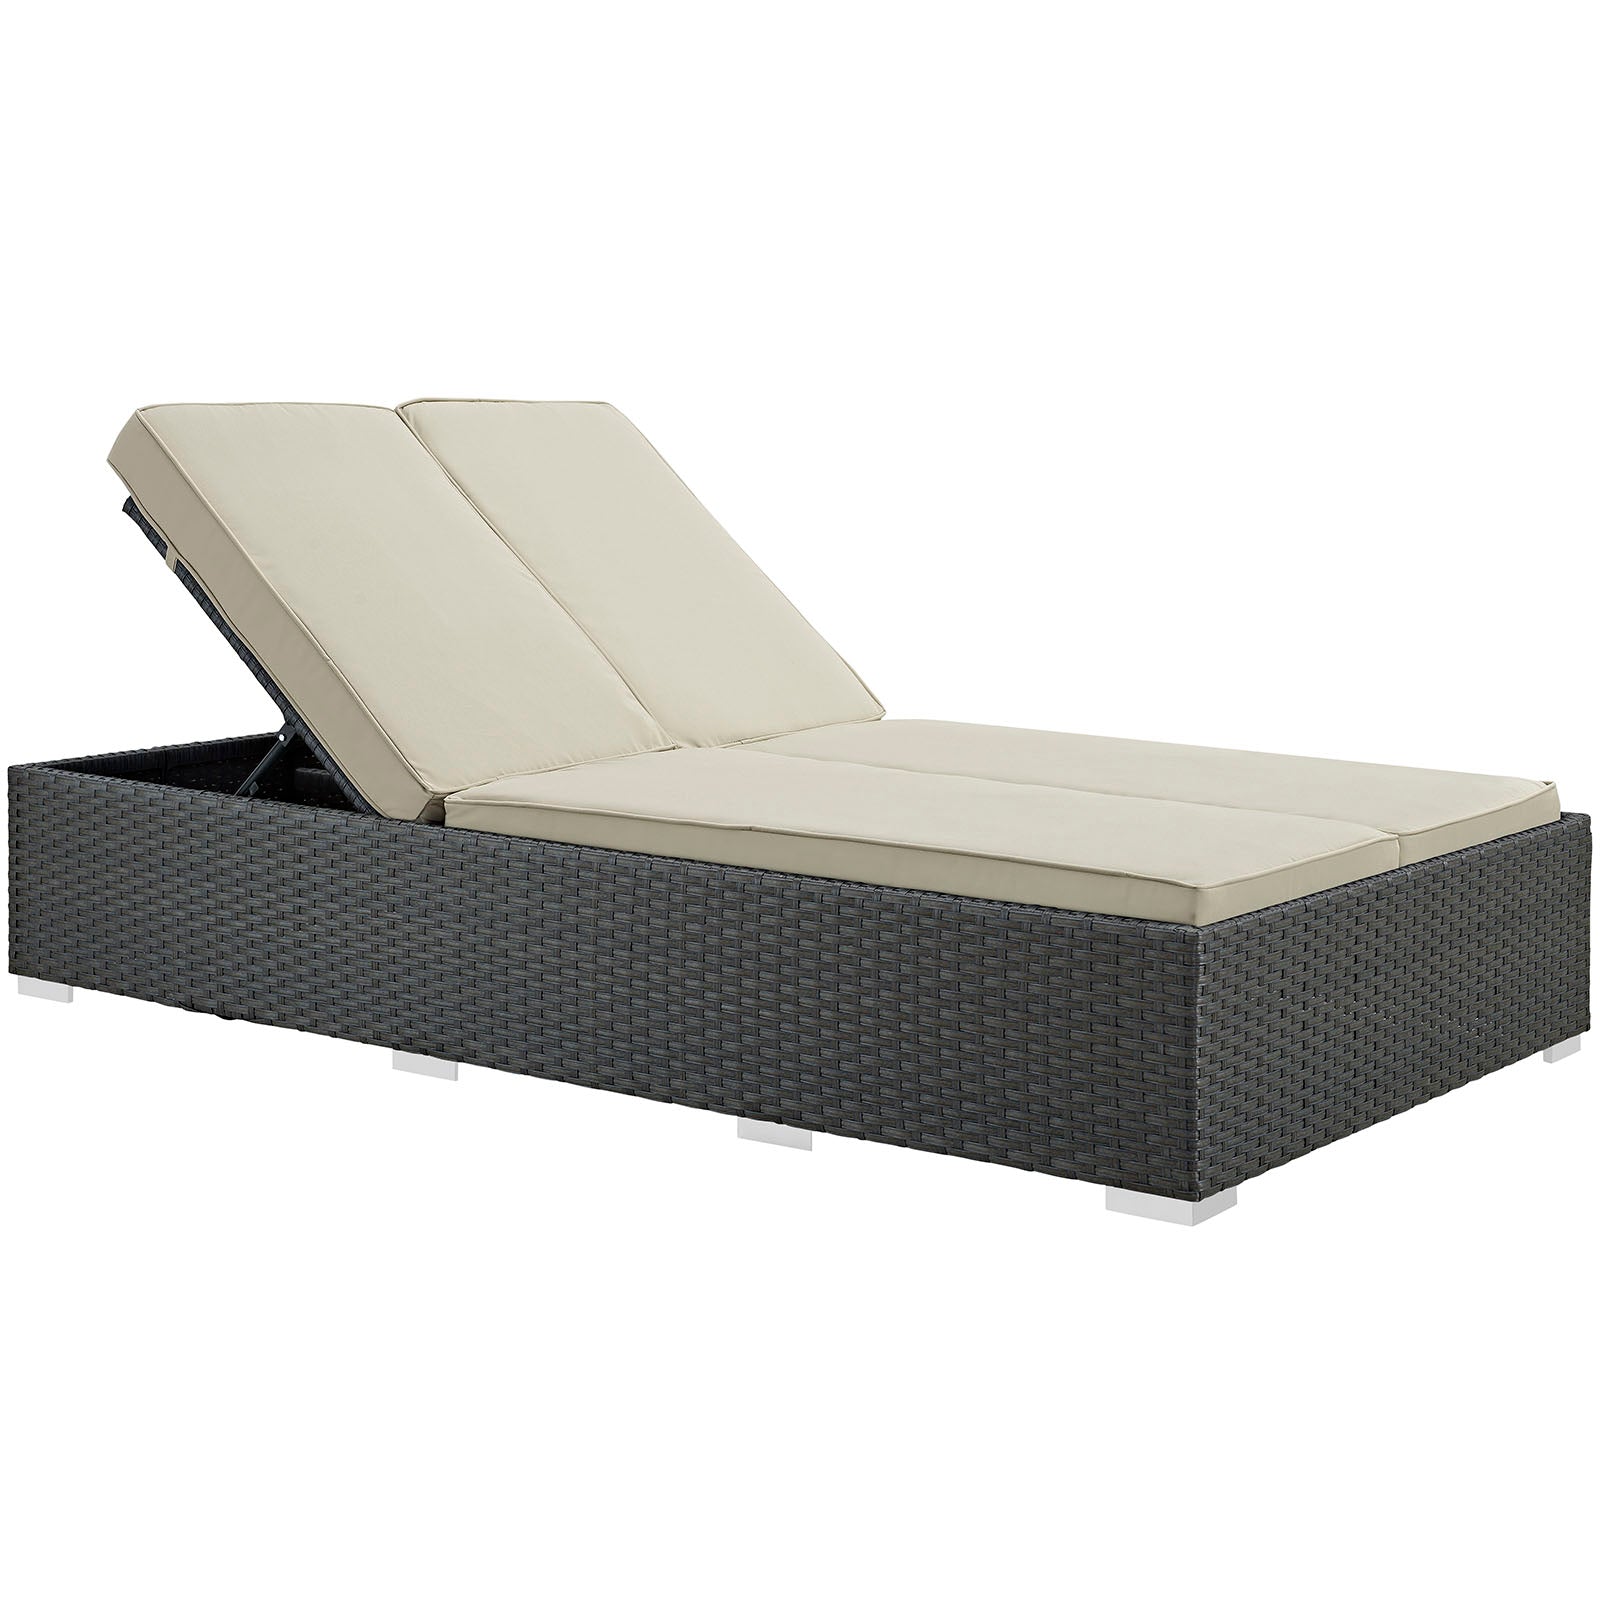 Sojourn Outdoor Patio Sunbrella Double Chaise Chocolate Beige